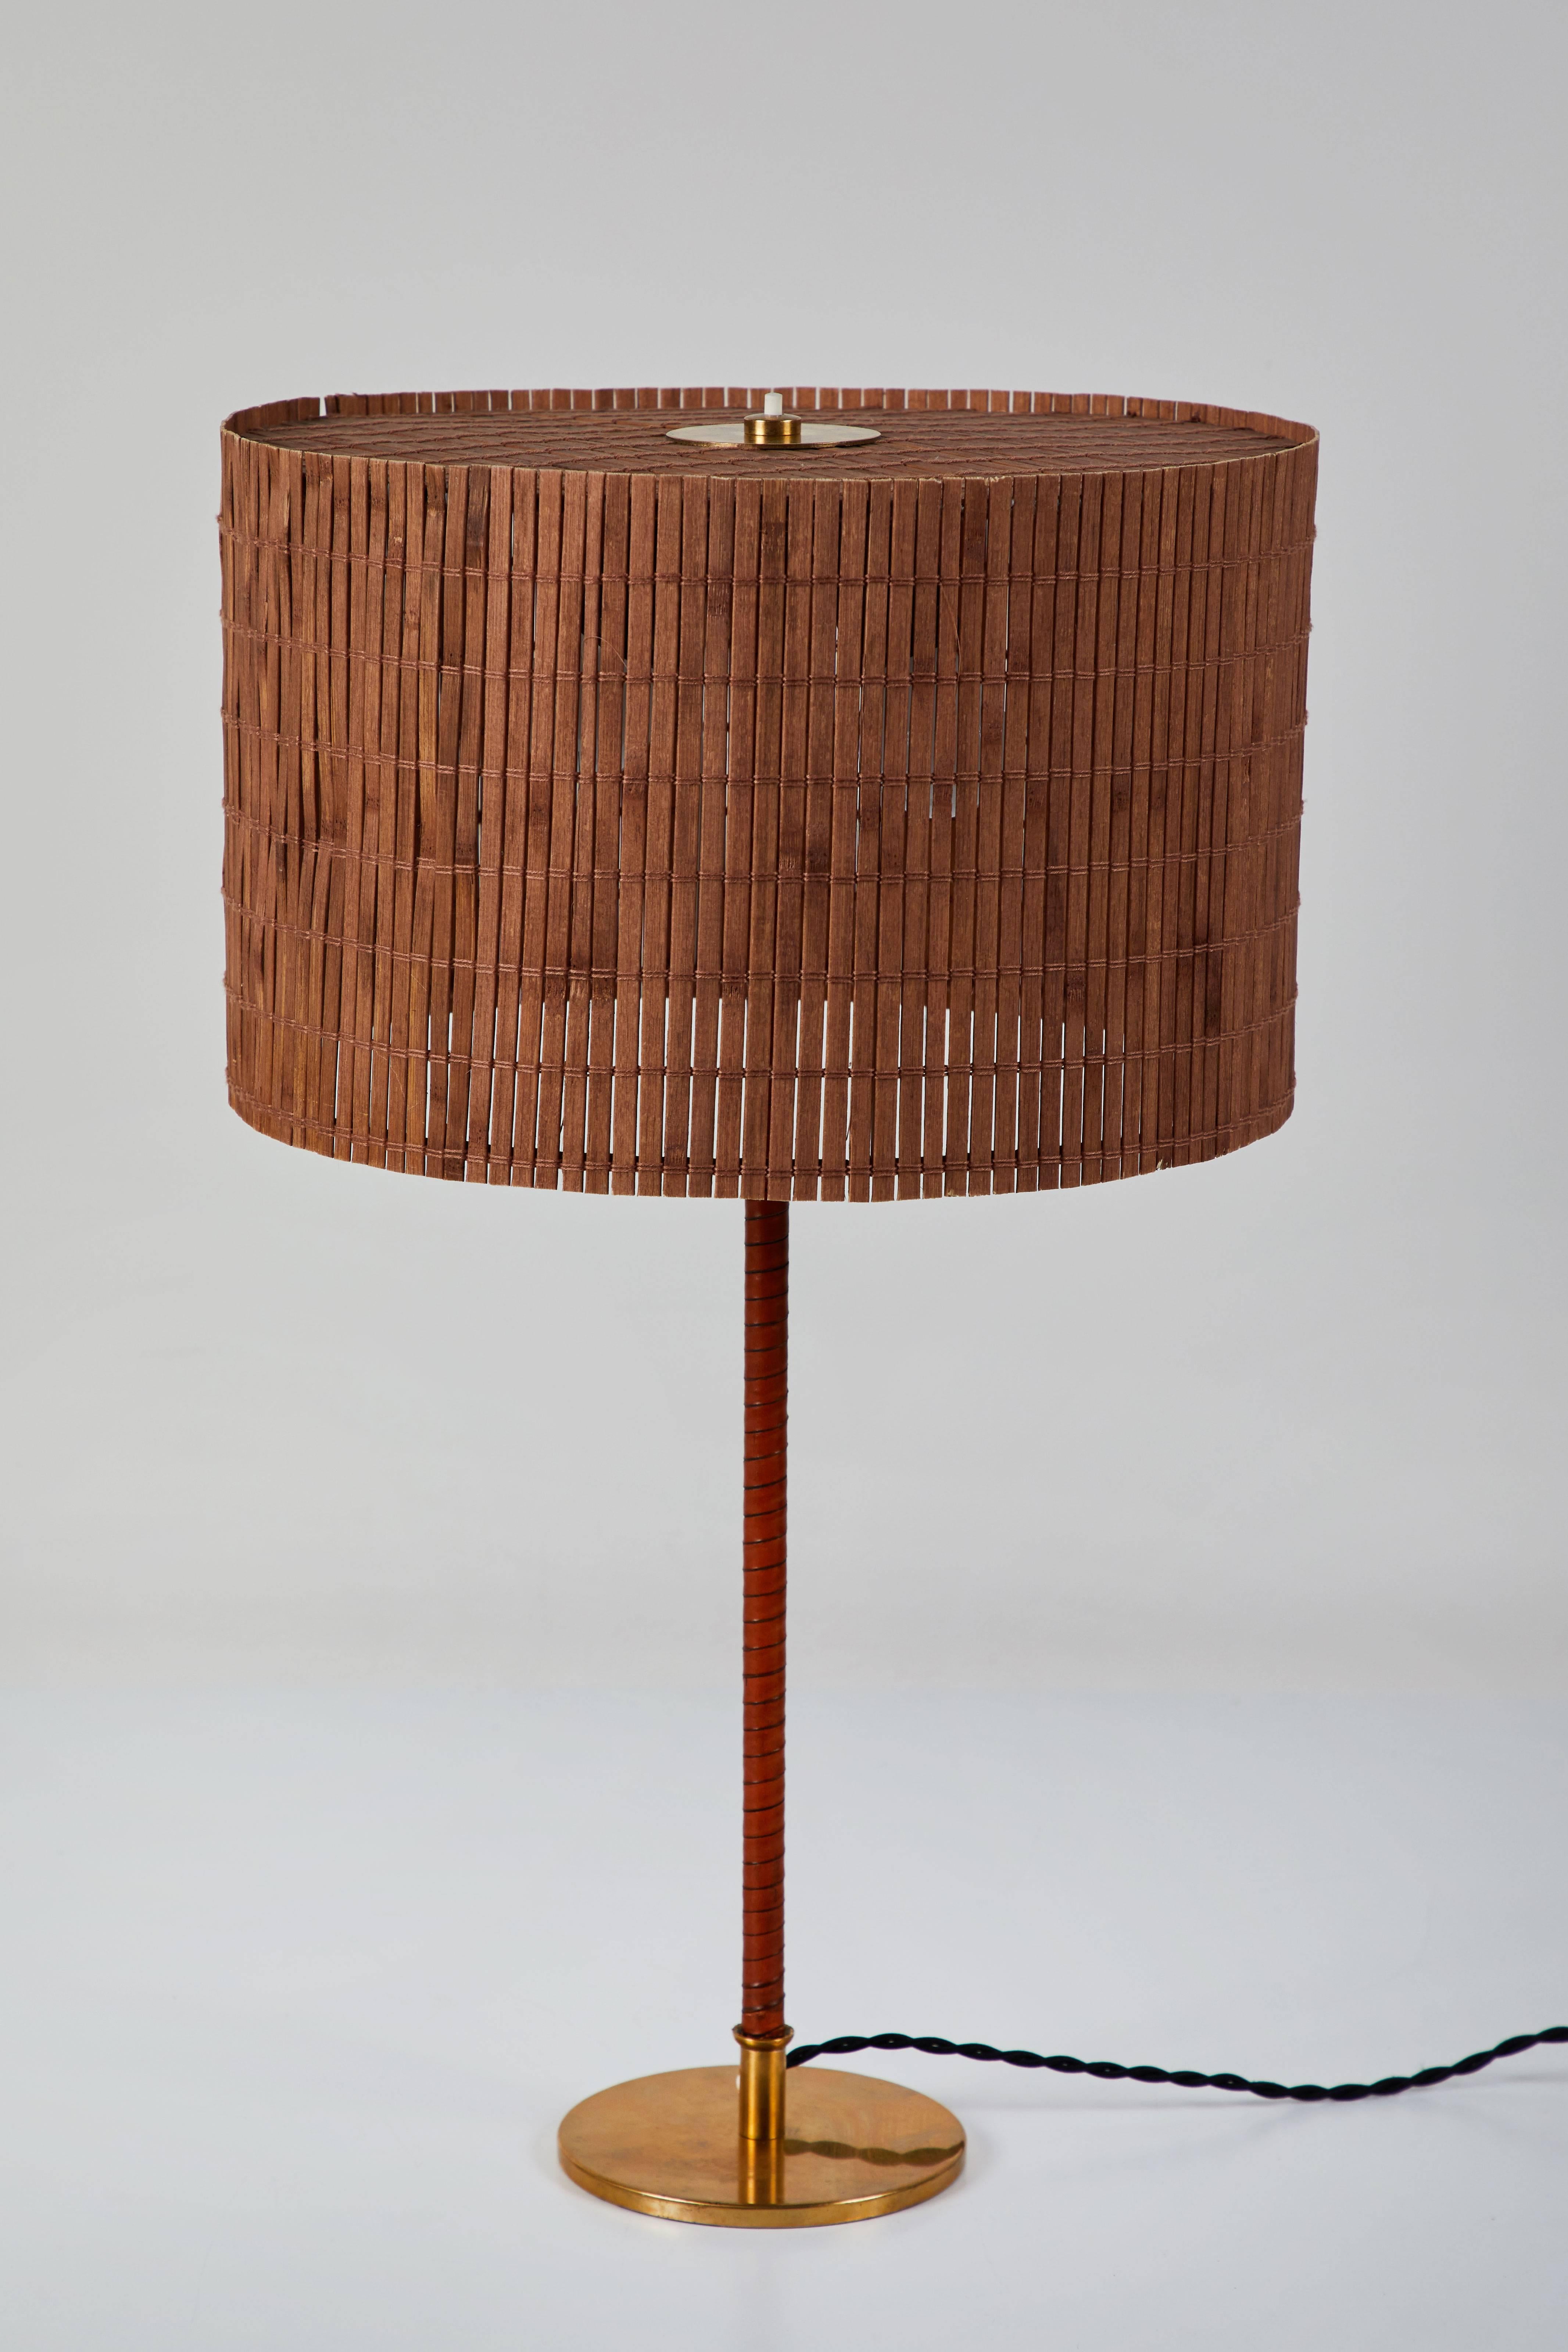 Finnish Model 9205 Table Lamp by Paavo Tynell for Taito Oy